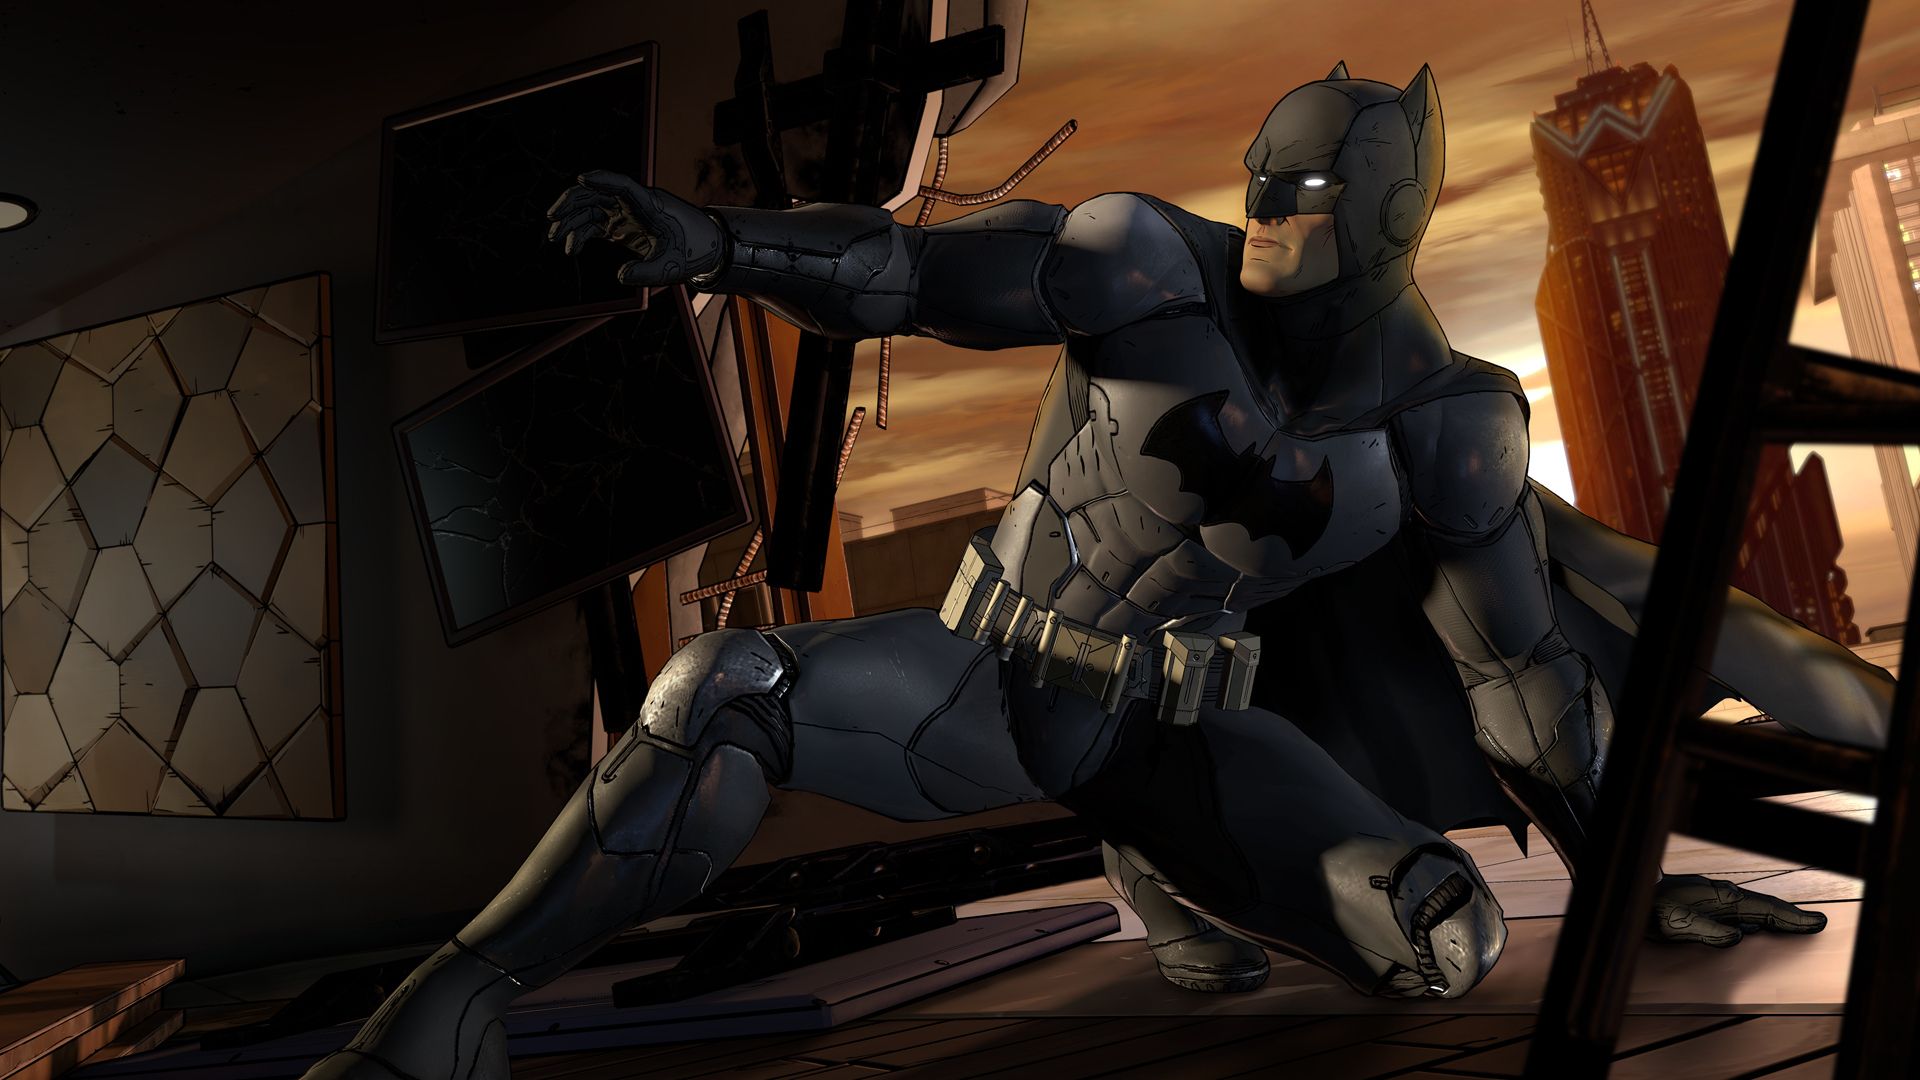 Batman games - Batman sliding across a roof in a dark scene, one knee aloft, the other down on the ground.